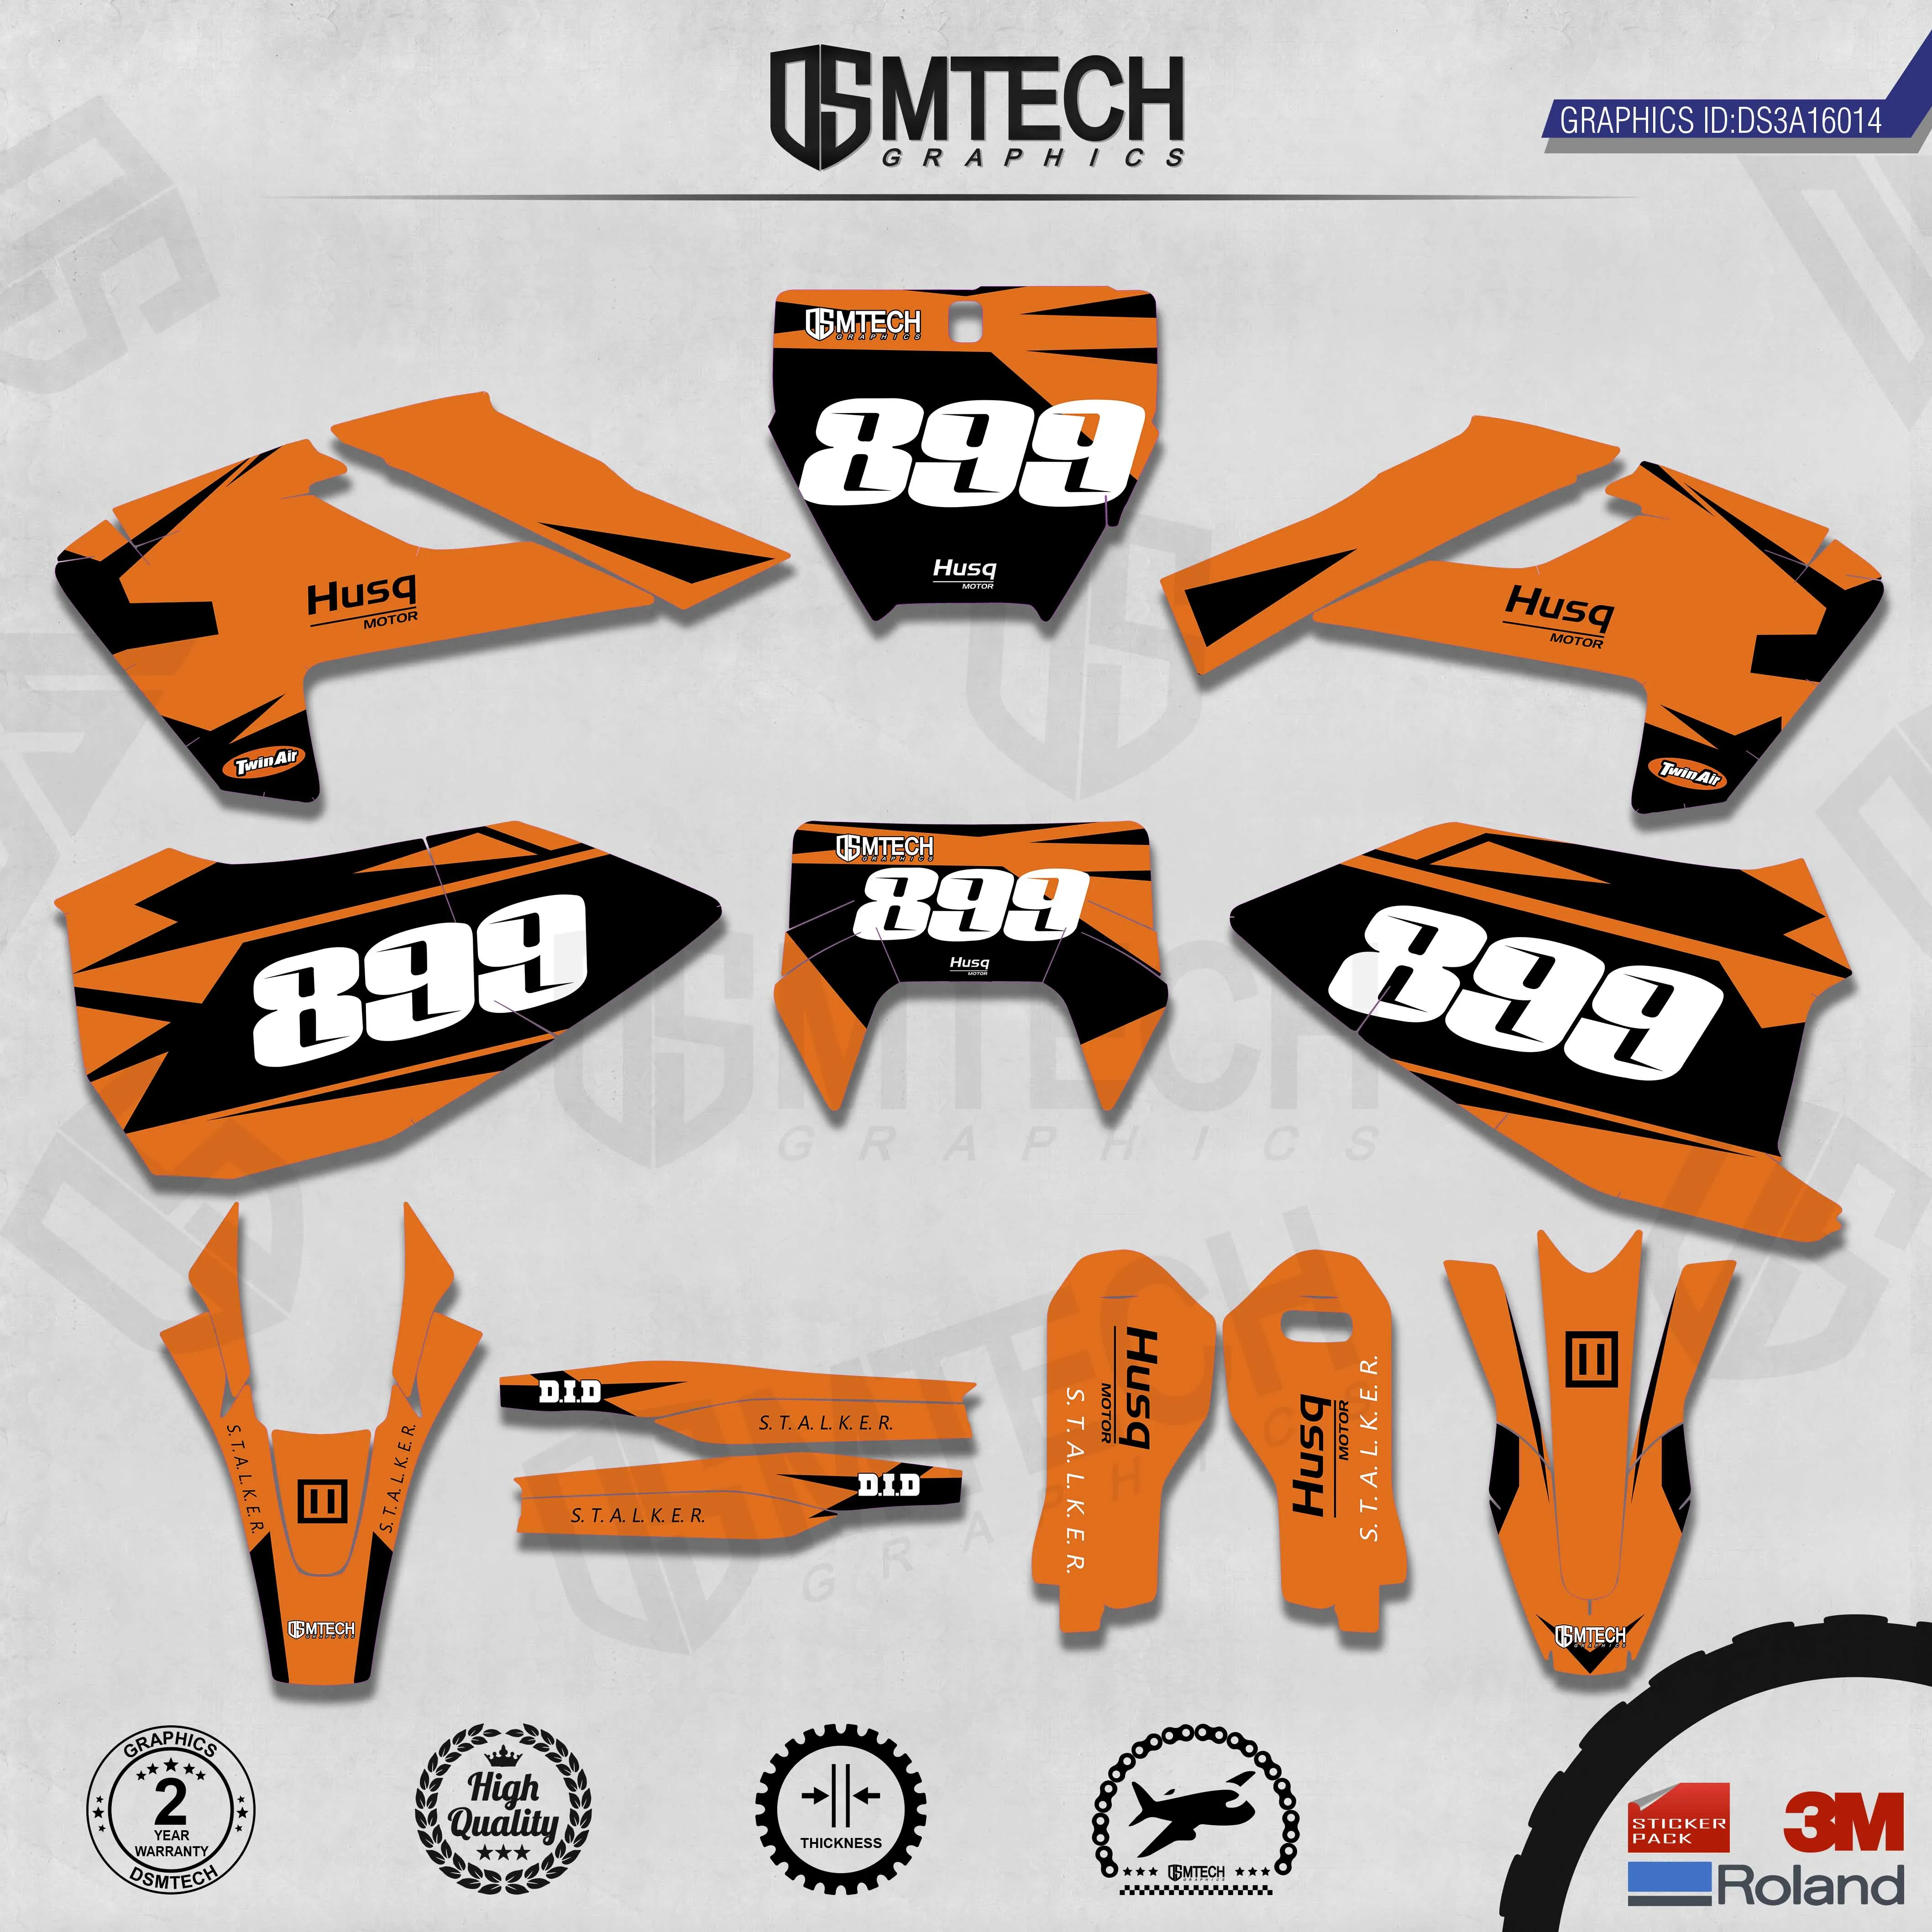 DSMTECH Customized Team Graphics Backgrounds Decals 3M Custom Stickers For TC FC TX FX FS 2016-2018  TE FE 2017-2019  014